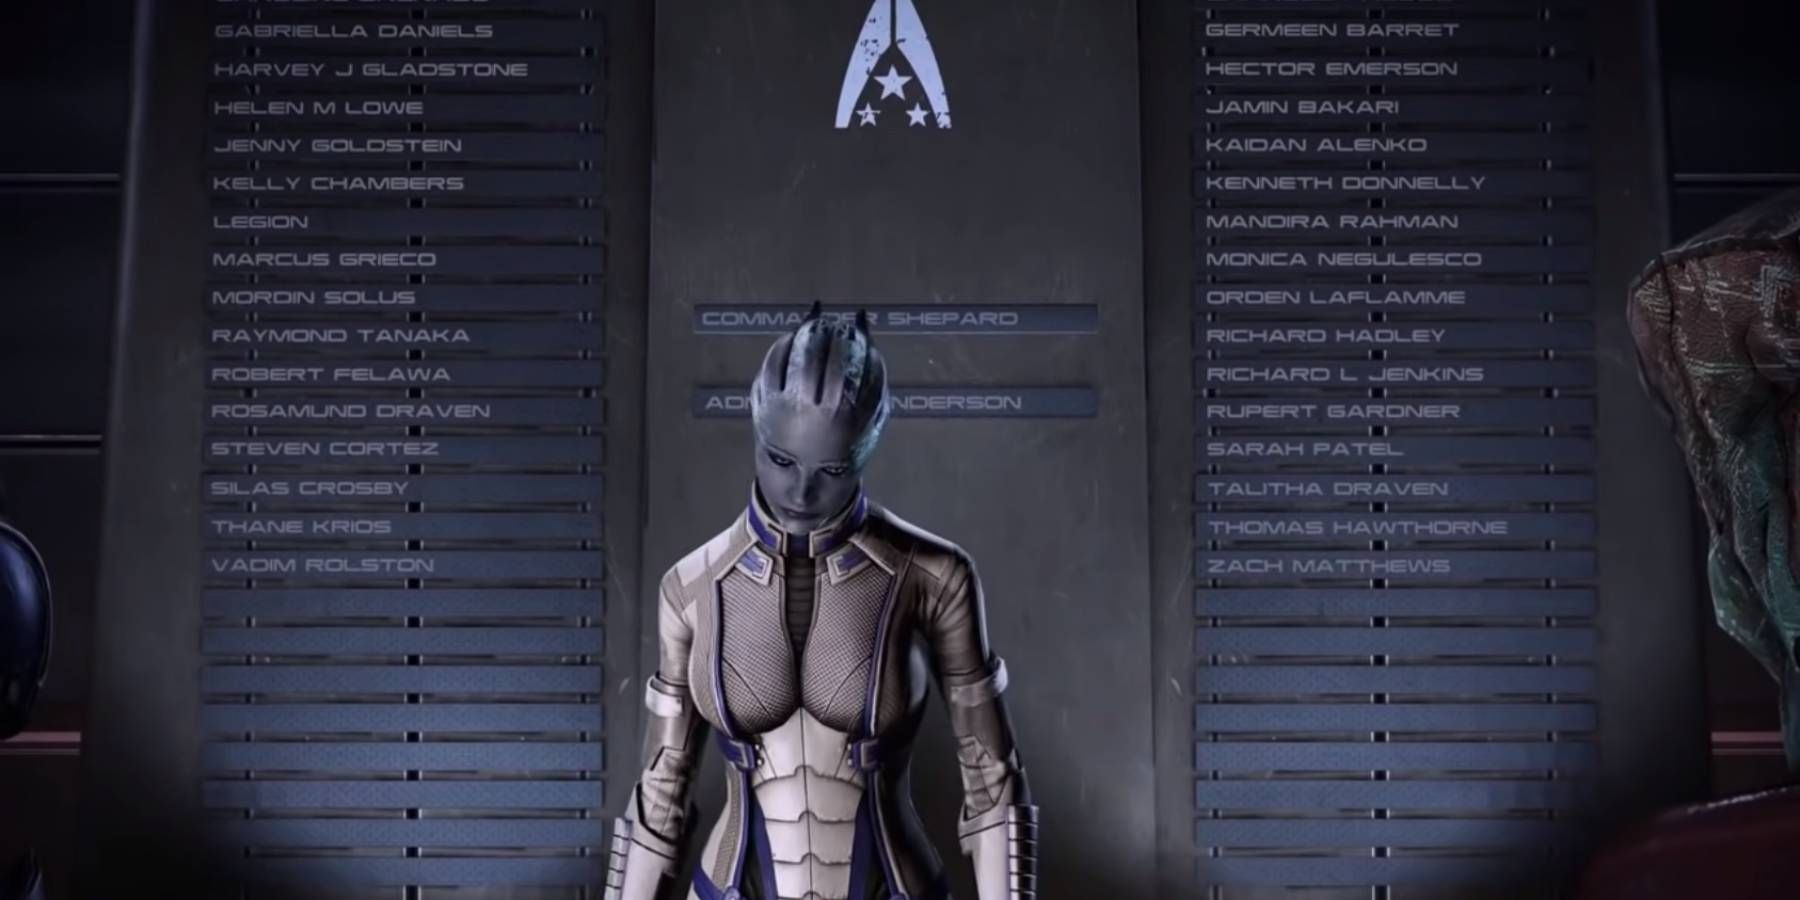 Liara walking away from the Normandy's memorial wall in the ending of Mass Effect 3